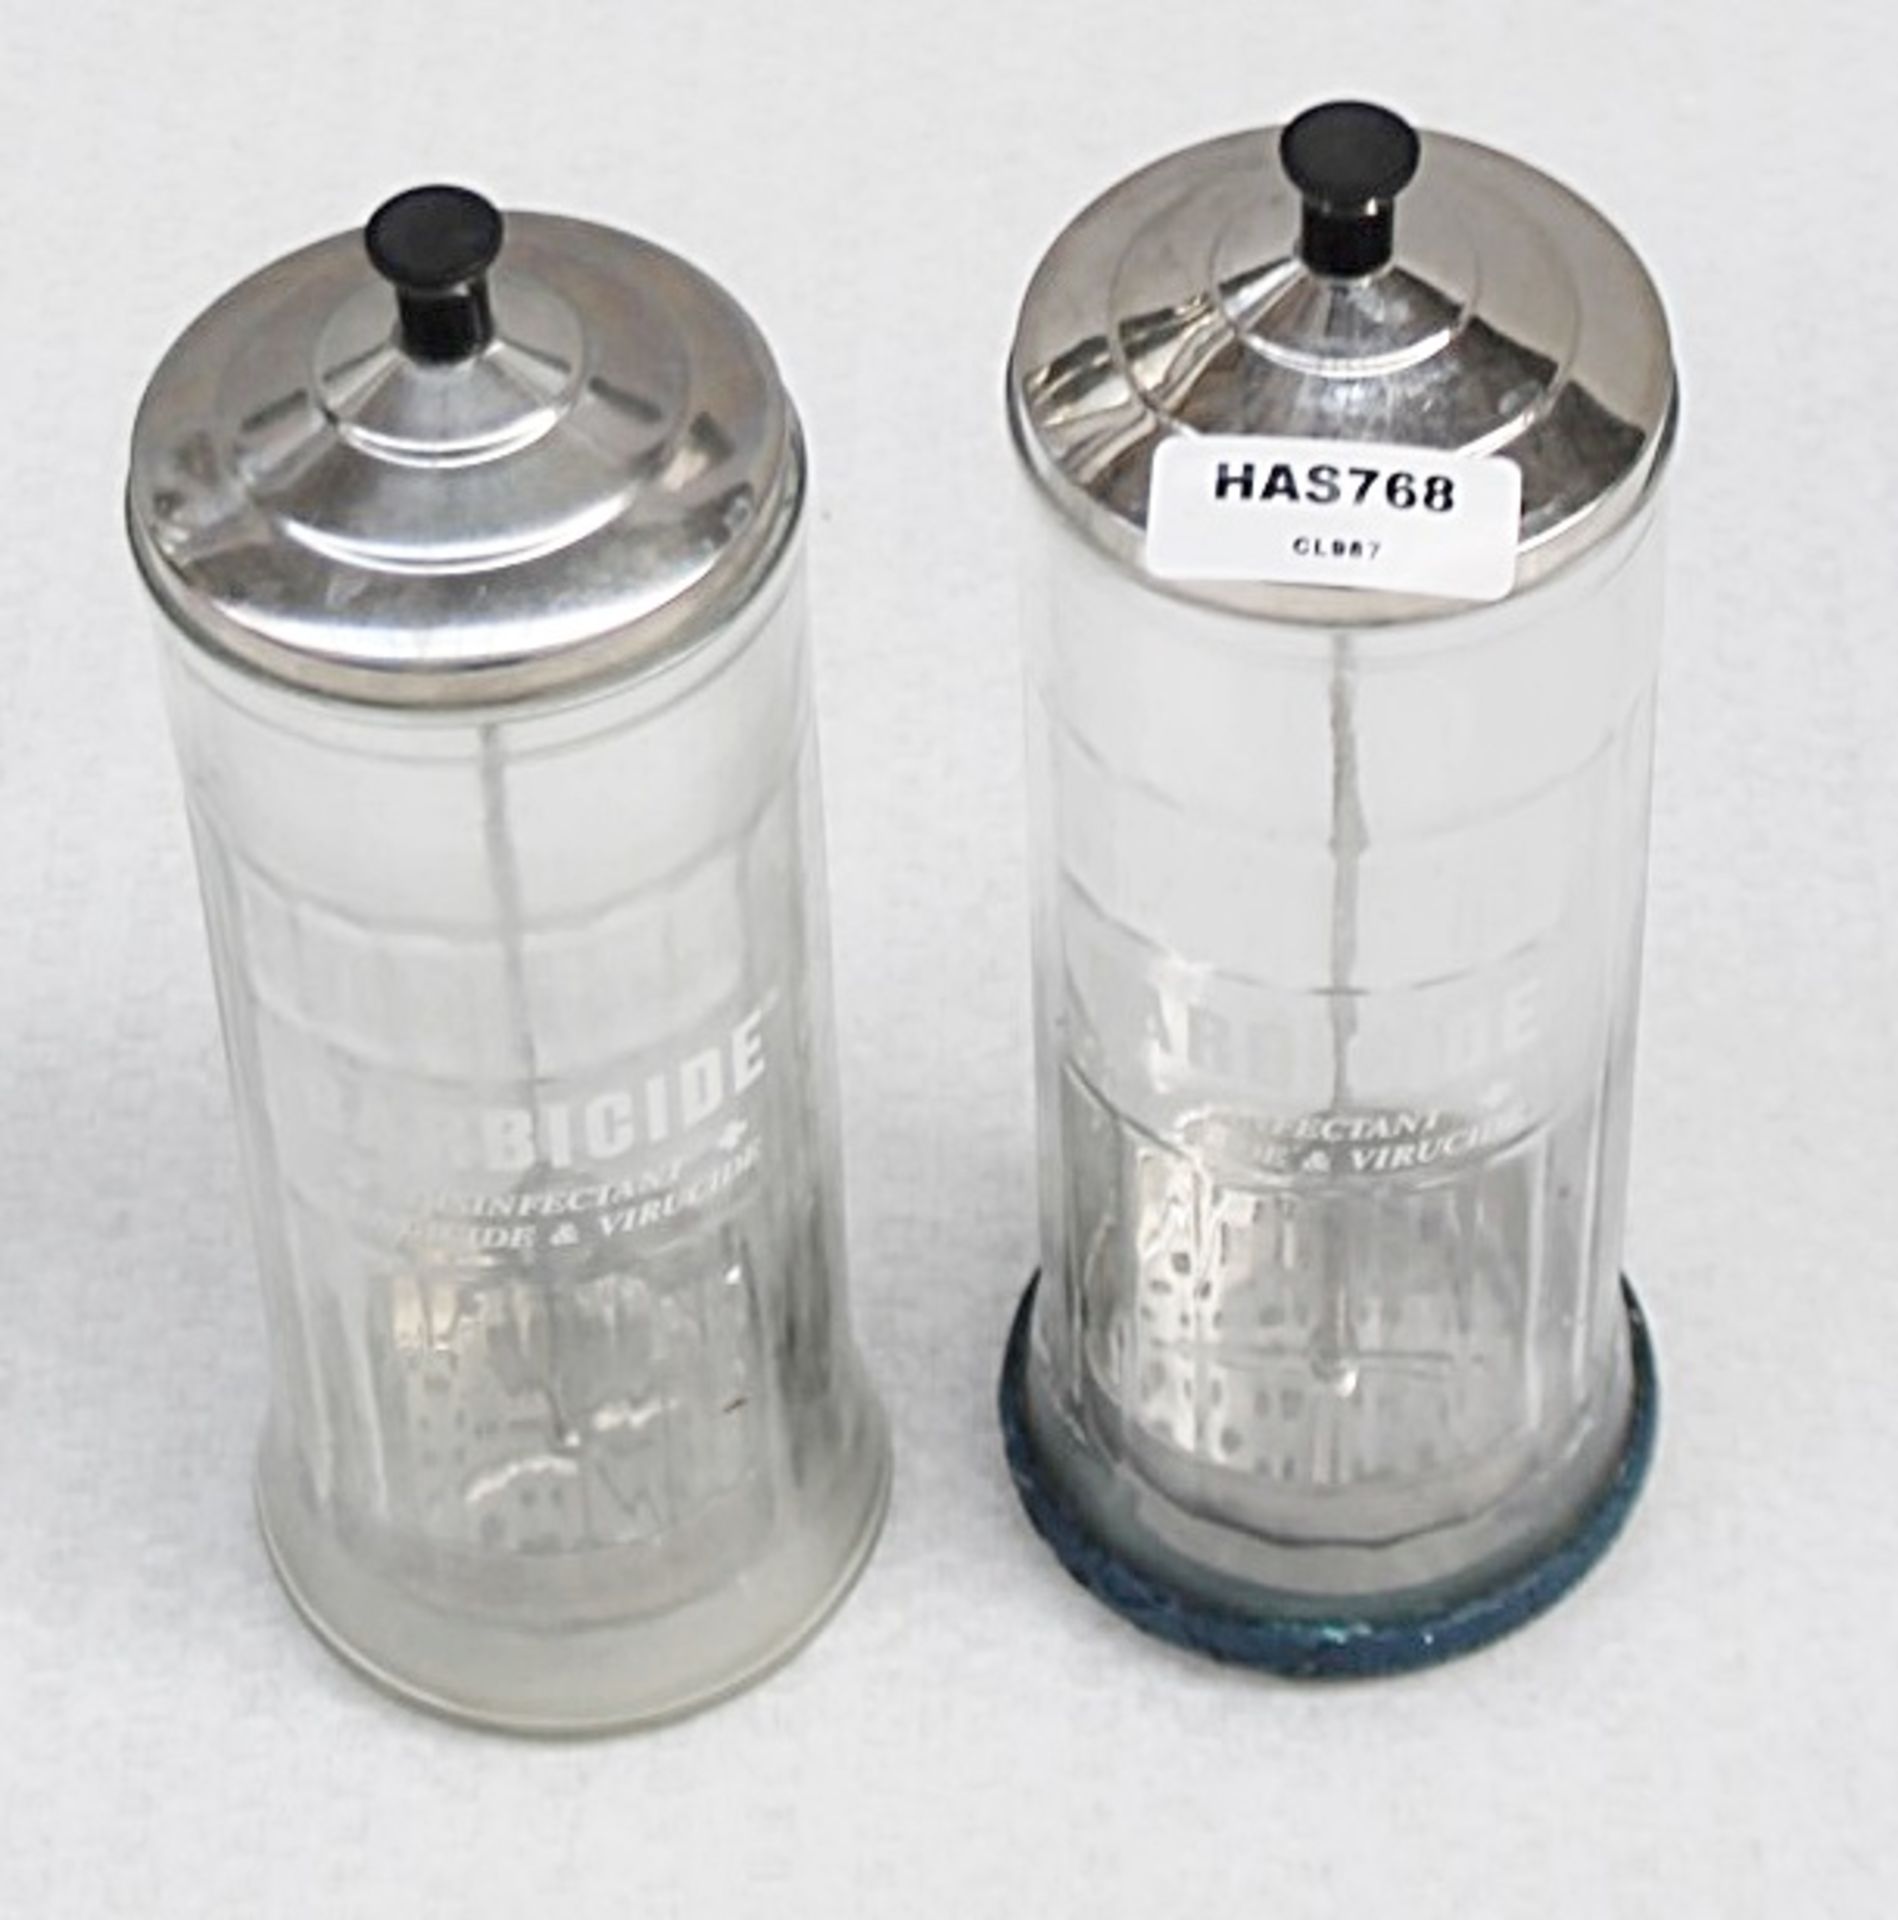 2 x Barbicide Jars - Dimensions: H28 x Ø10cm - Recently Removed From A Boutique Hair Salon - Ref: - Image 2 of 3